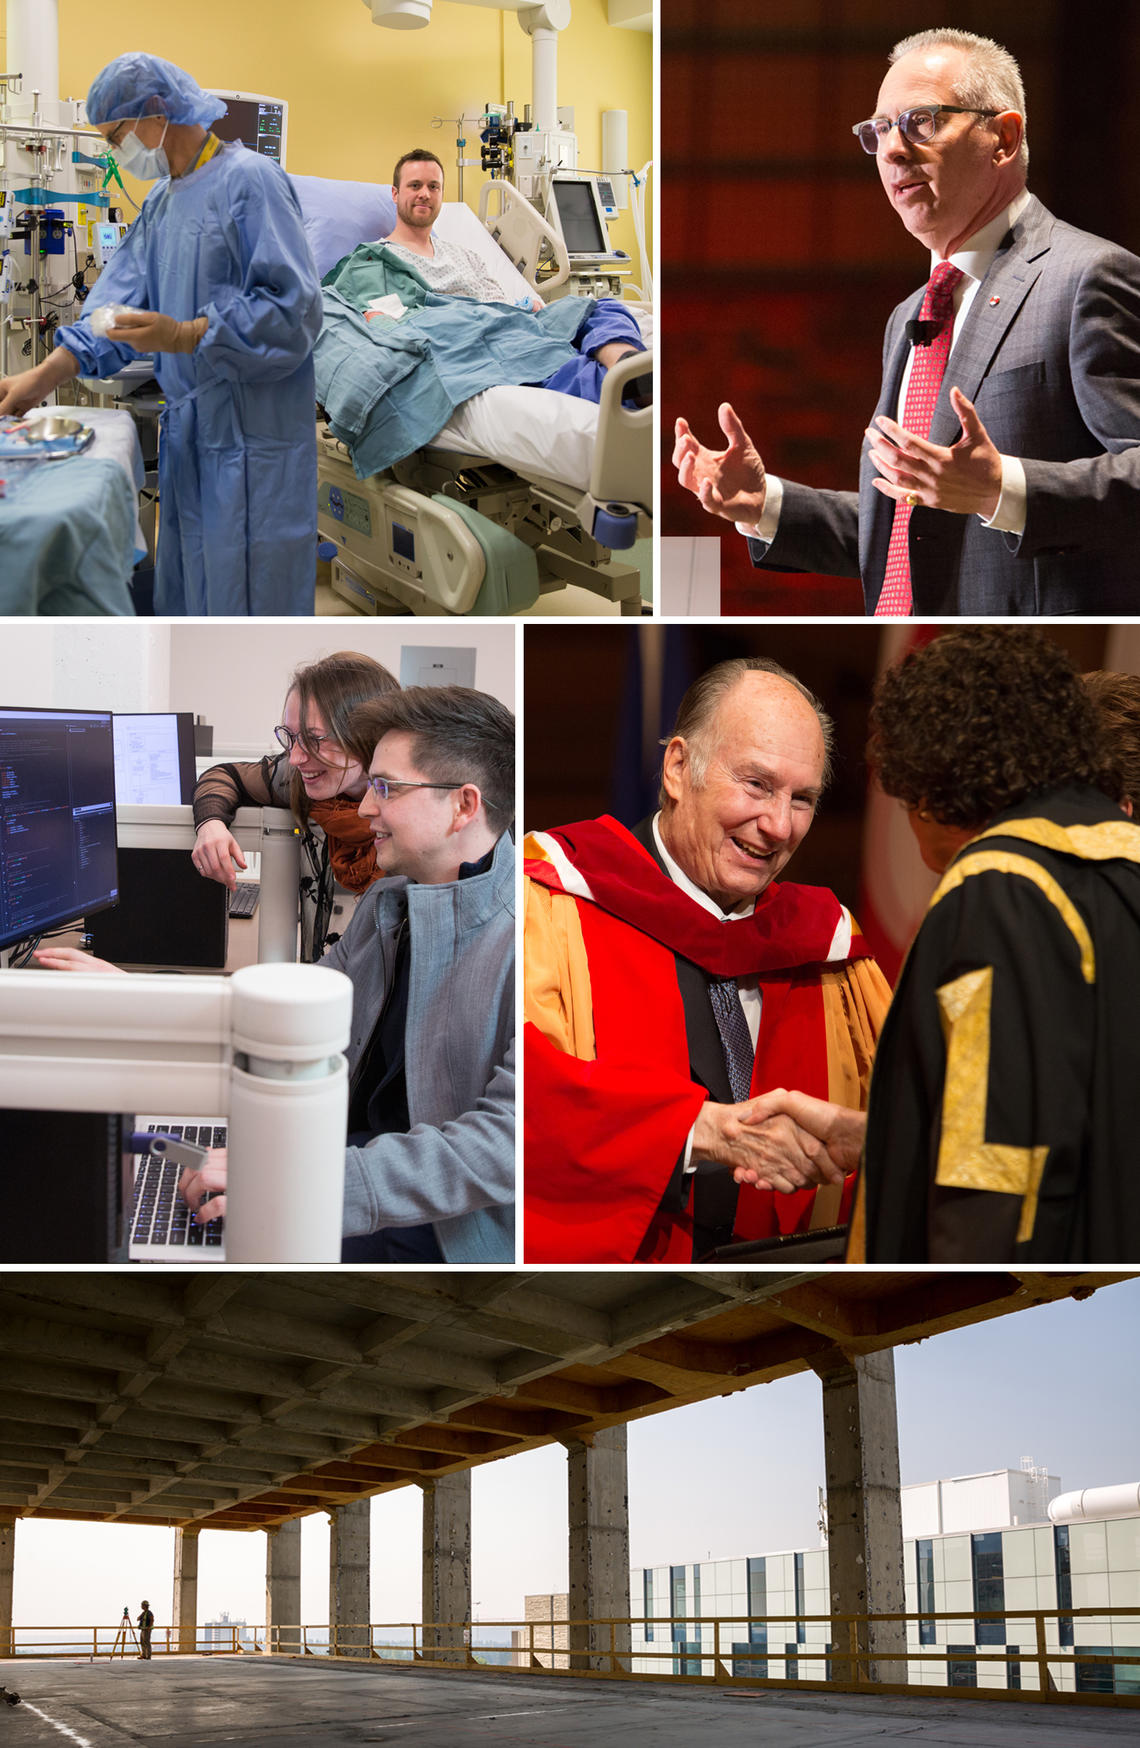 Recent campus news moments, clockwise from top left: In a study involving the University of Calgary, a patient was the first person in Canada to receive a direct intravenous injection gene replacement to treat urea cycle disorder; President Ed McCauley speaks at a campus meet-and-greet with students, faculty and staff; His Highness the Aga Khan receives an honorary degree; progress made on the MacKimmie Complex and Professional Faculties Building Redevelopment Project; students in the Schulich School of Eng